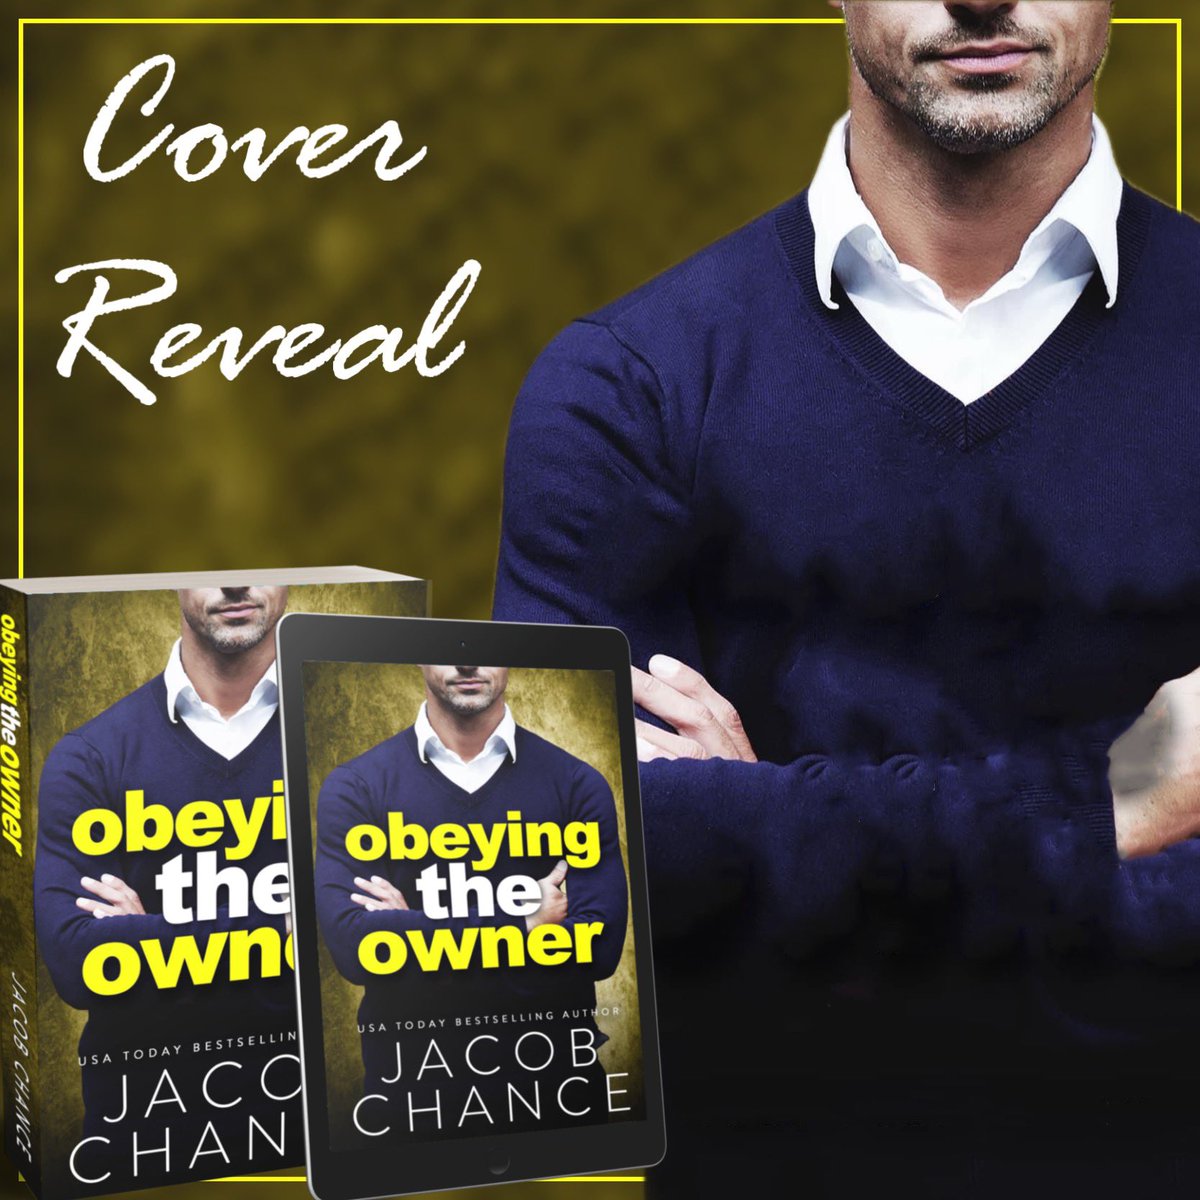 💛🏒 #CoverReveal 💛🏒

𝘖𝘉𝘌𝘠𝘐𝘕𝘎 𝘛𝘏𝘌 𝘖𝘞𝘕𝘌𝘙 (#CharlestonCoyotesSeries 6) by #AuthorJacobChancw releases on April 17th.

Go to bit.ly/4al8cD5 for details.

#SingleDad #AgeGap #HockeyTeamOwner #BillionaireRomance #BossEmployee #PossessiveHero #ComingSoon